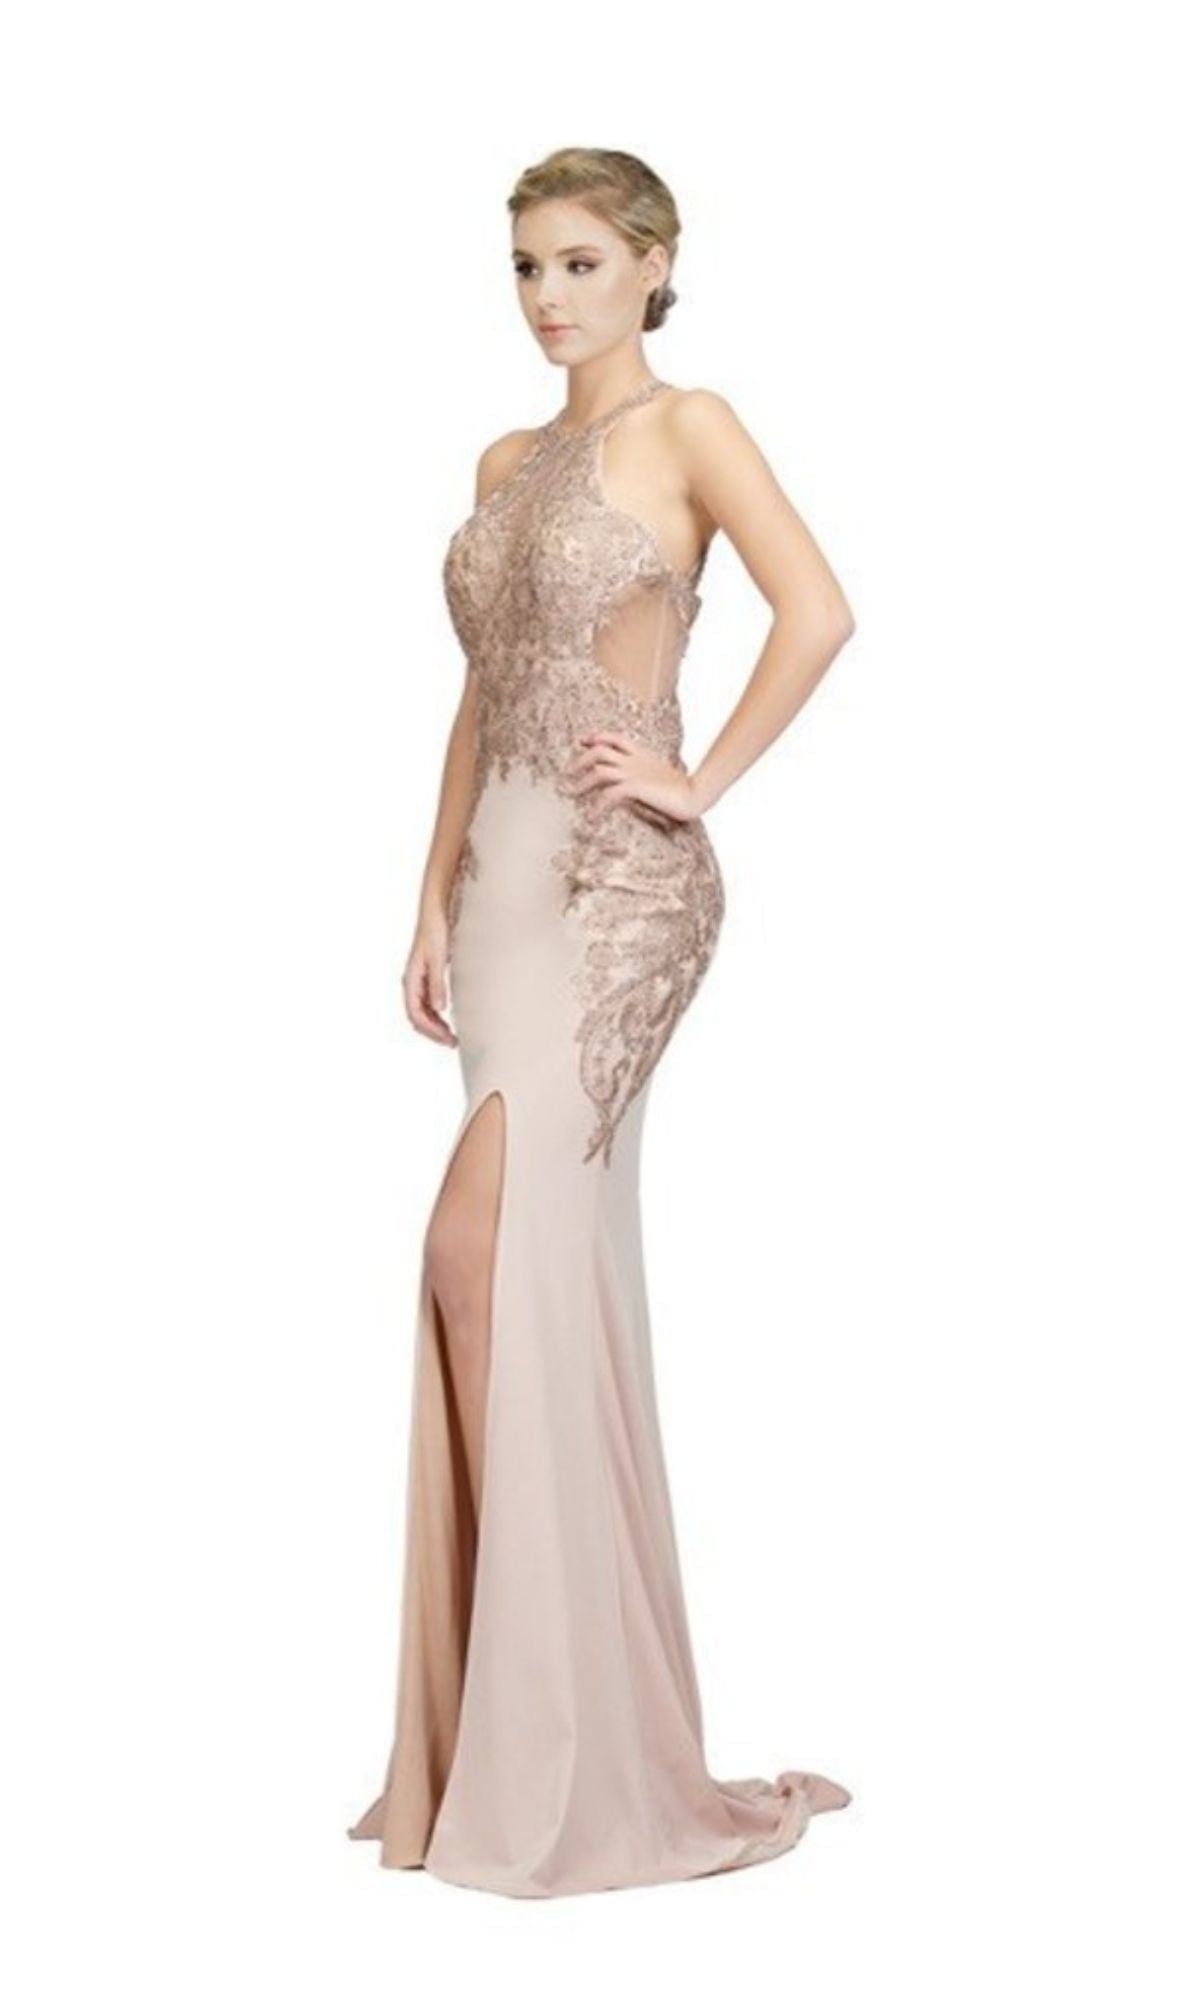 Long Prom Dress C1541 by Chicas